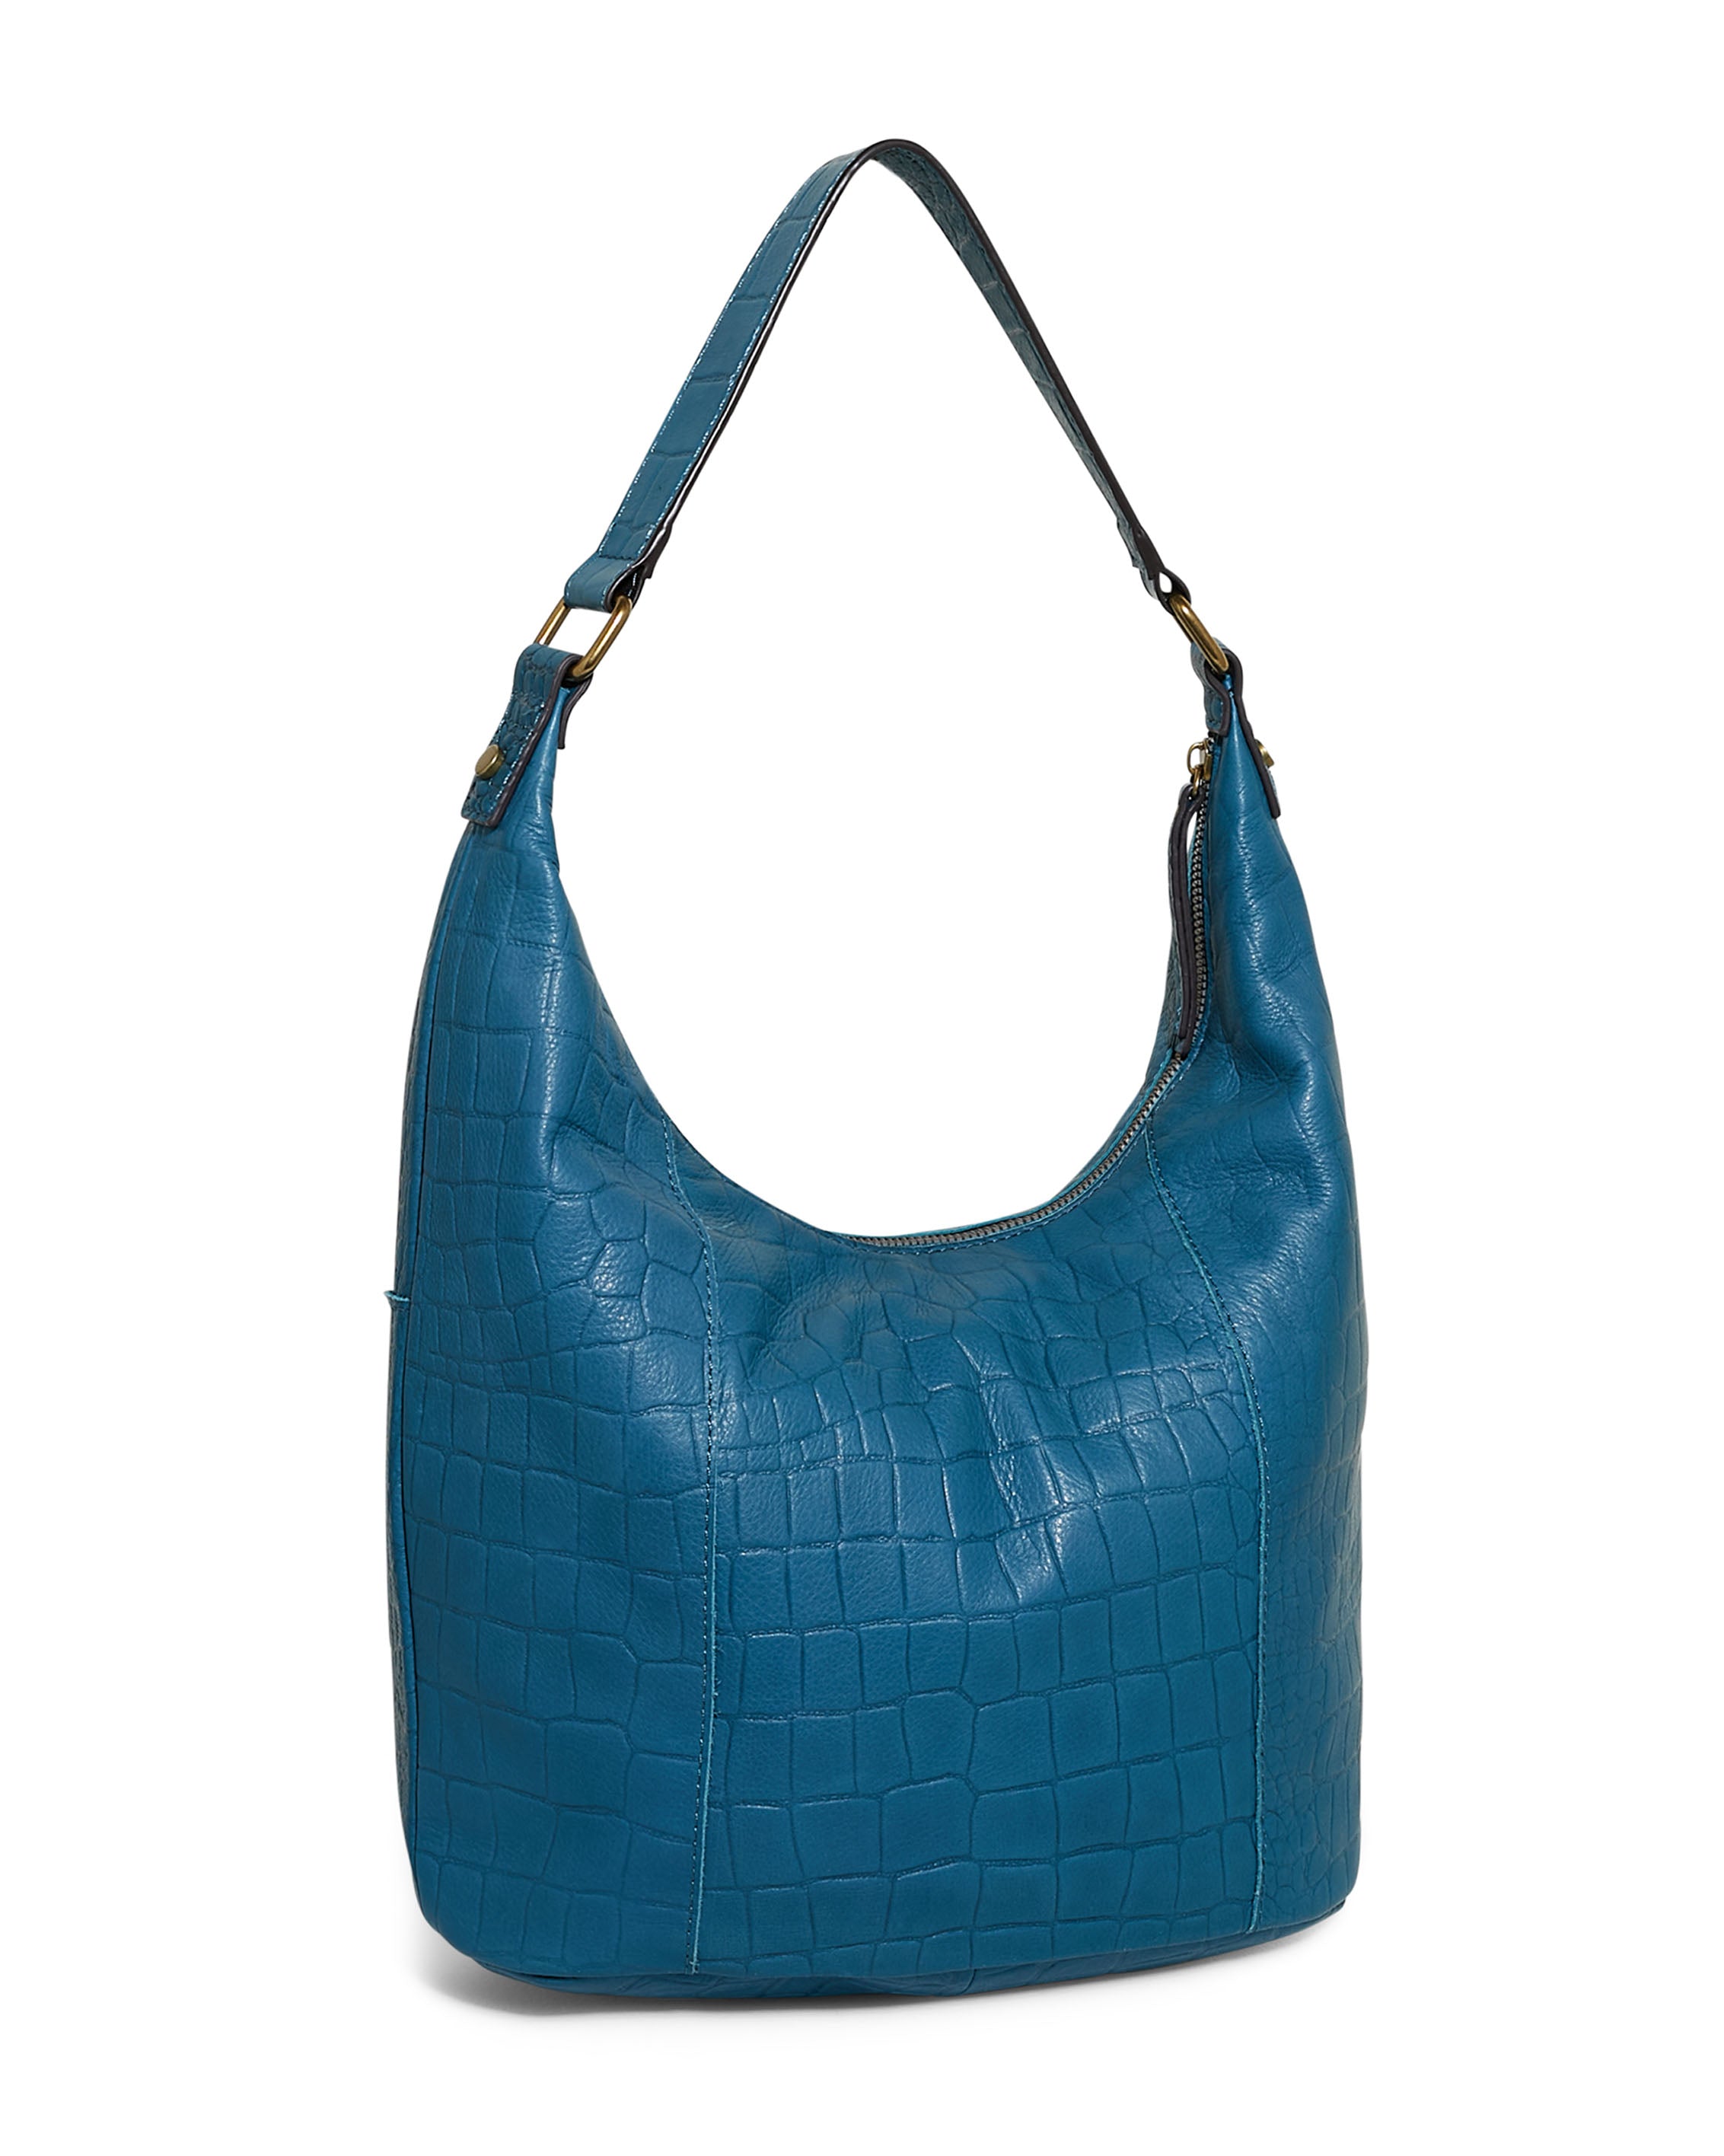 Carrie Leather Hobo in Deep Turquoise Croco | American Leather Co.